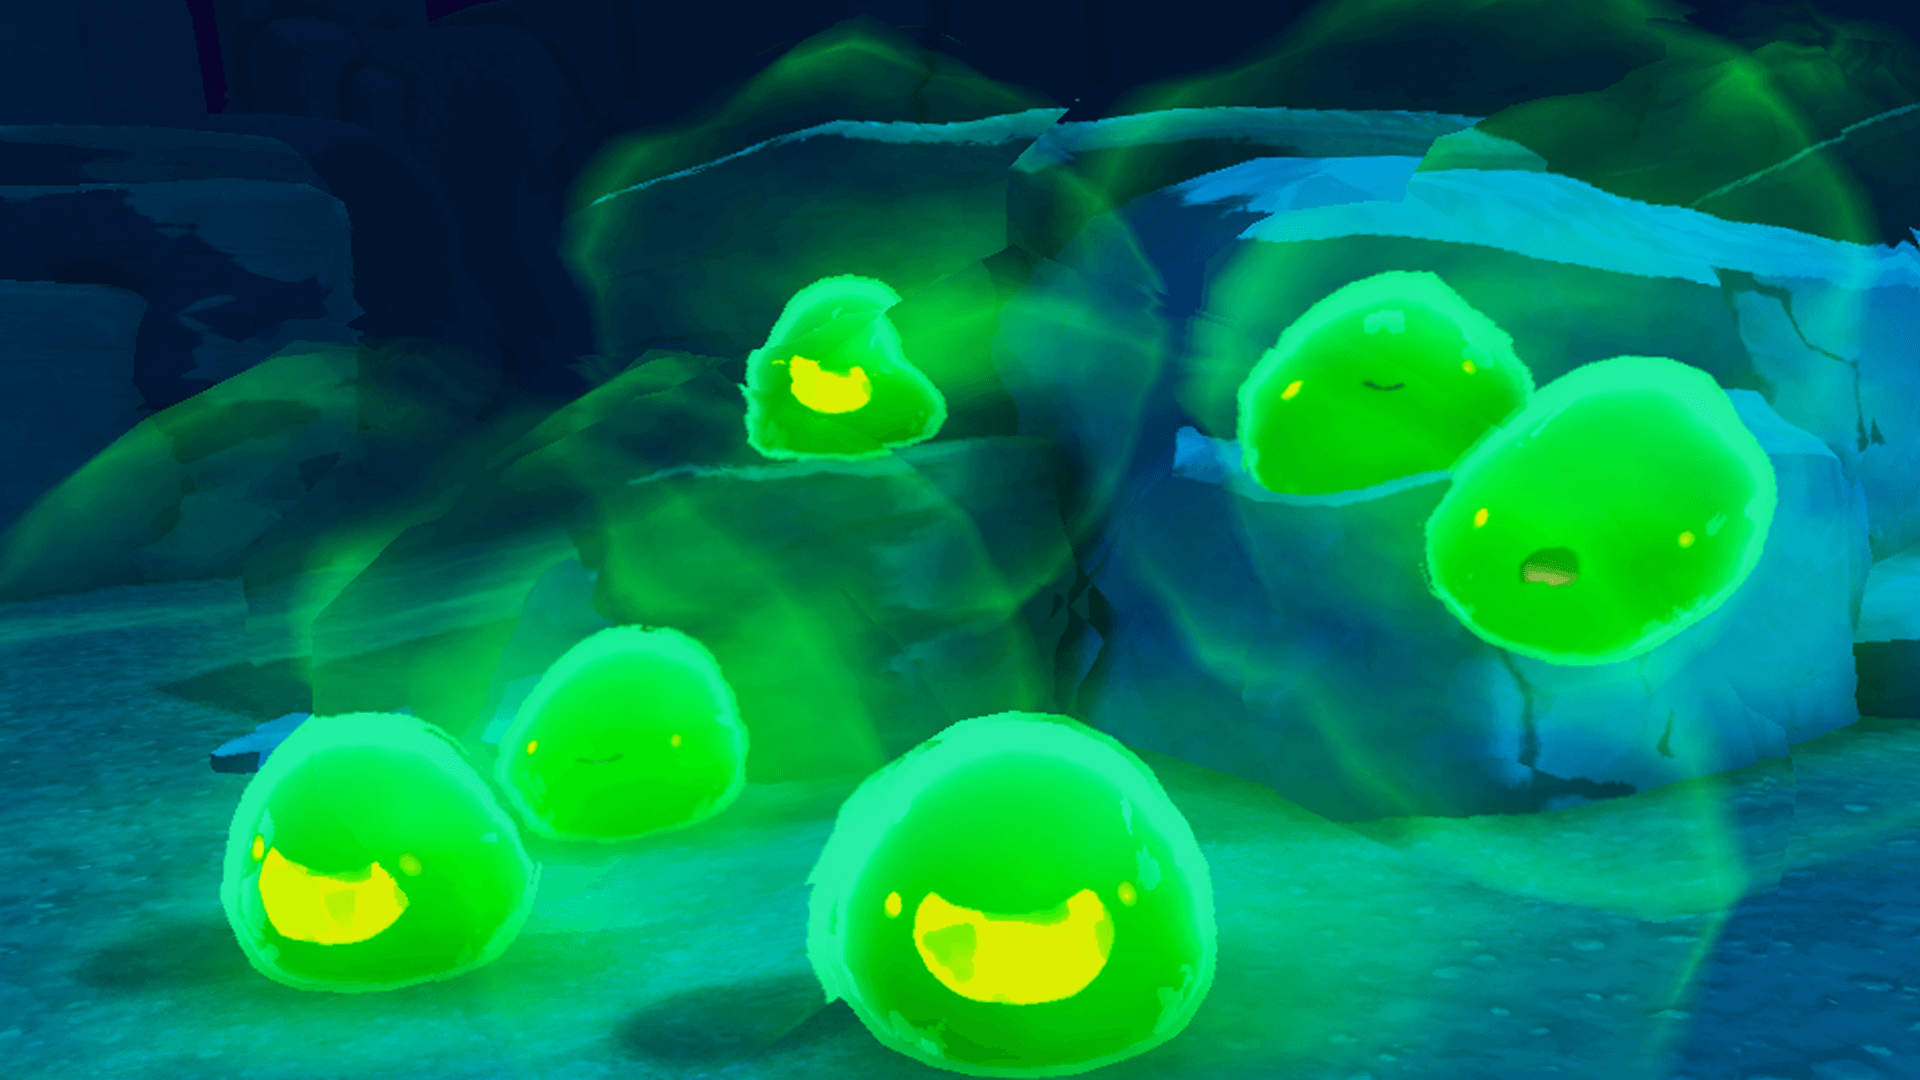 Slime Rancher Wallpapers